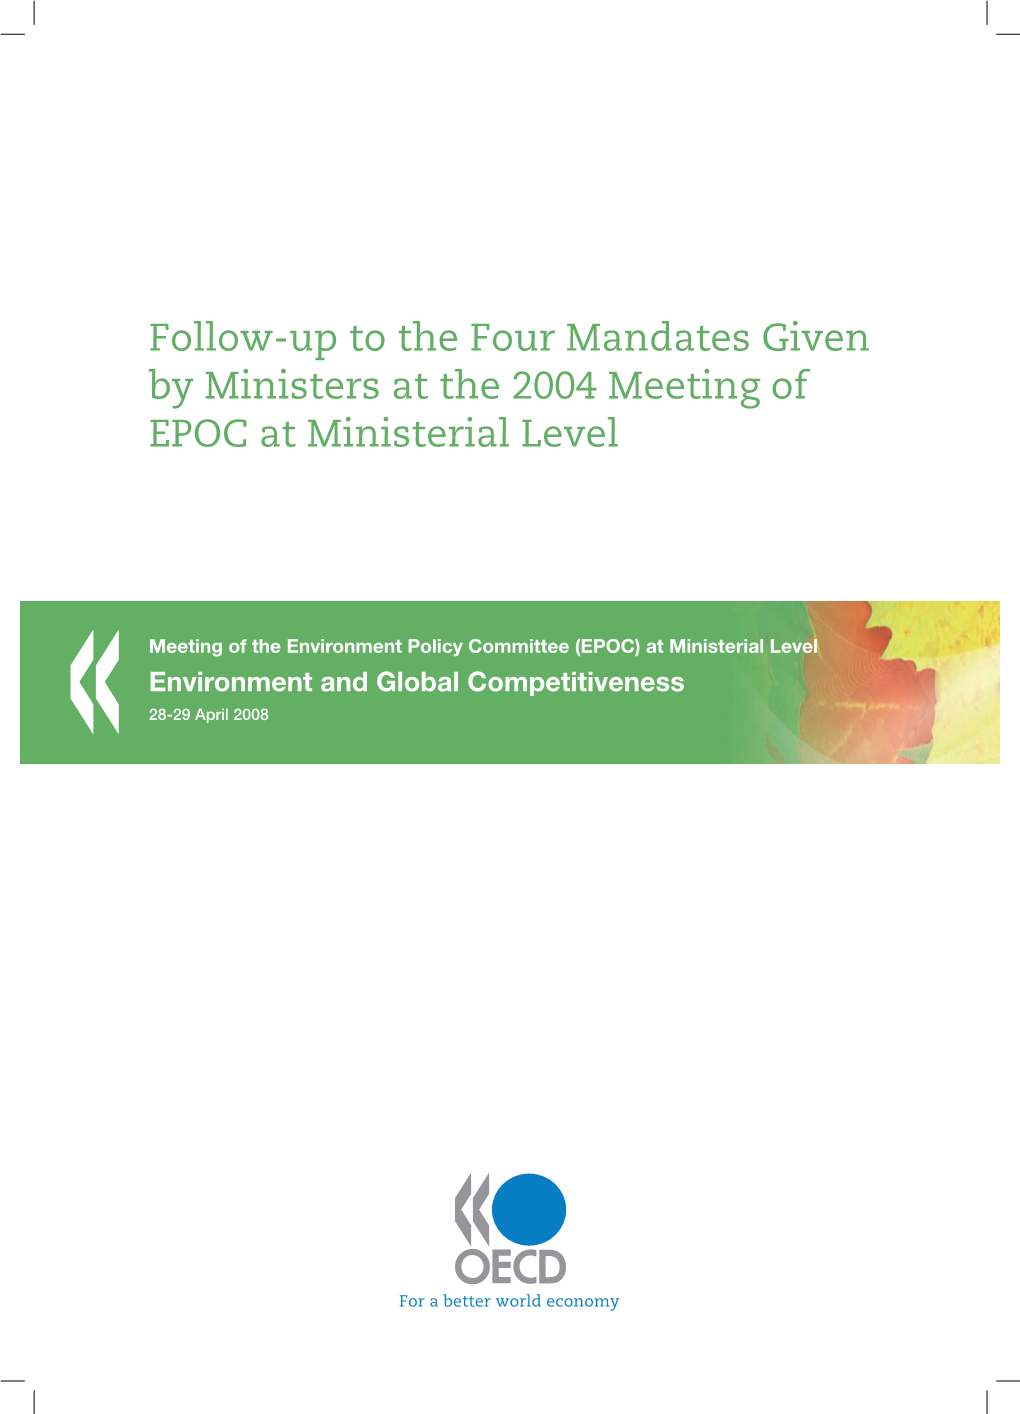 Follow-Up to the Four Mandates Given by Ministers at the 2004 Meeting of EPOC at Ministerial Level